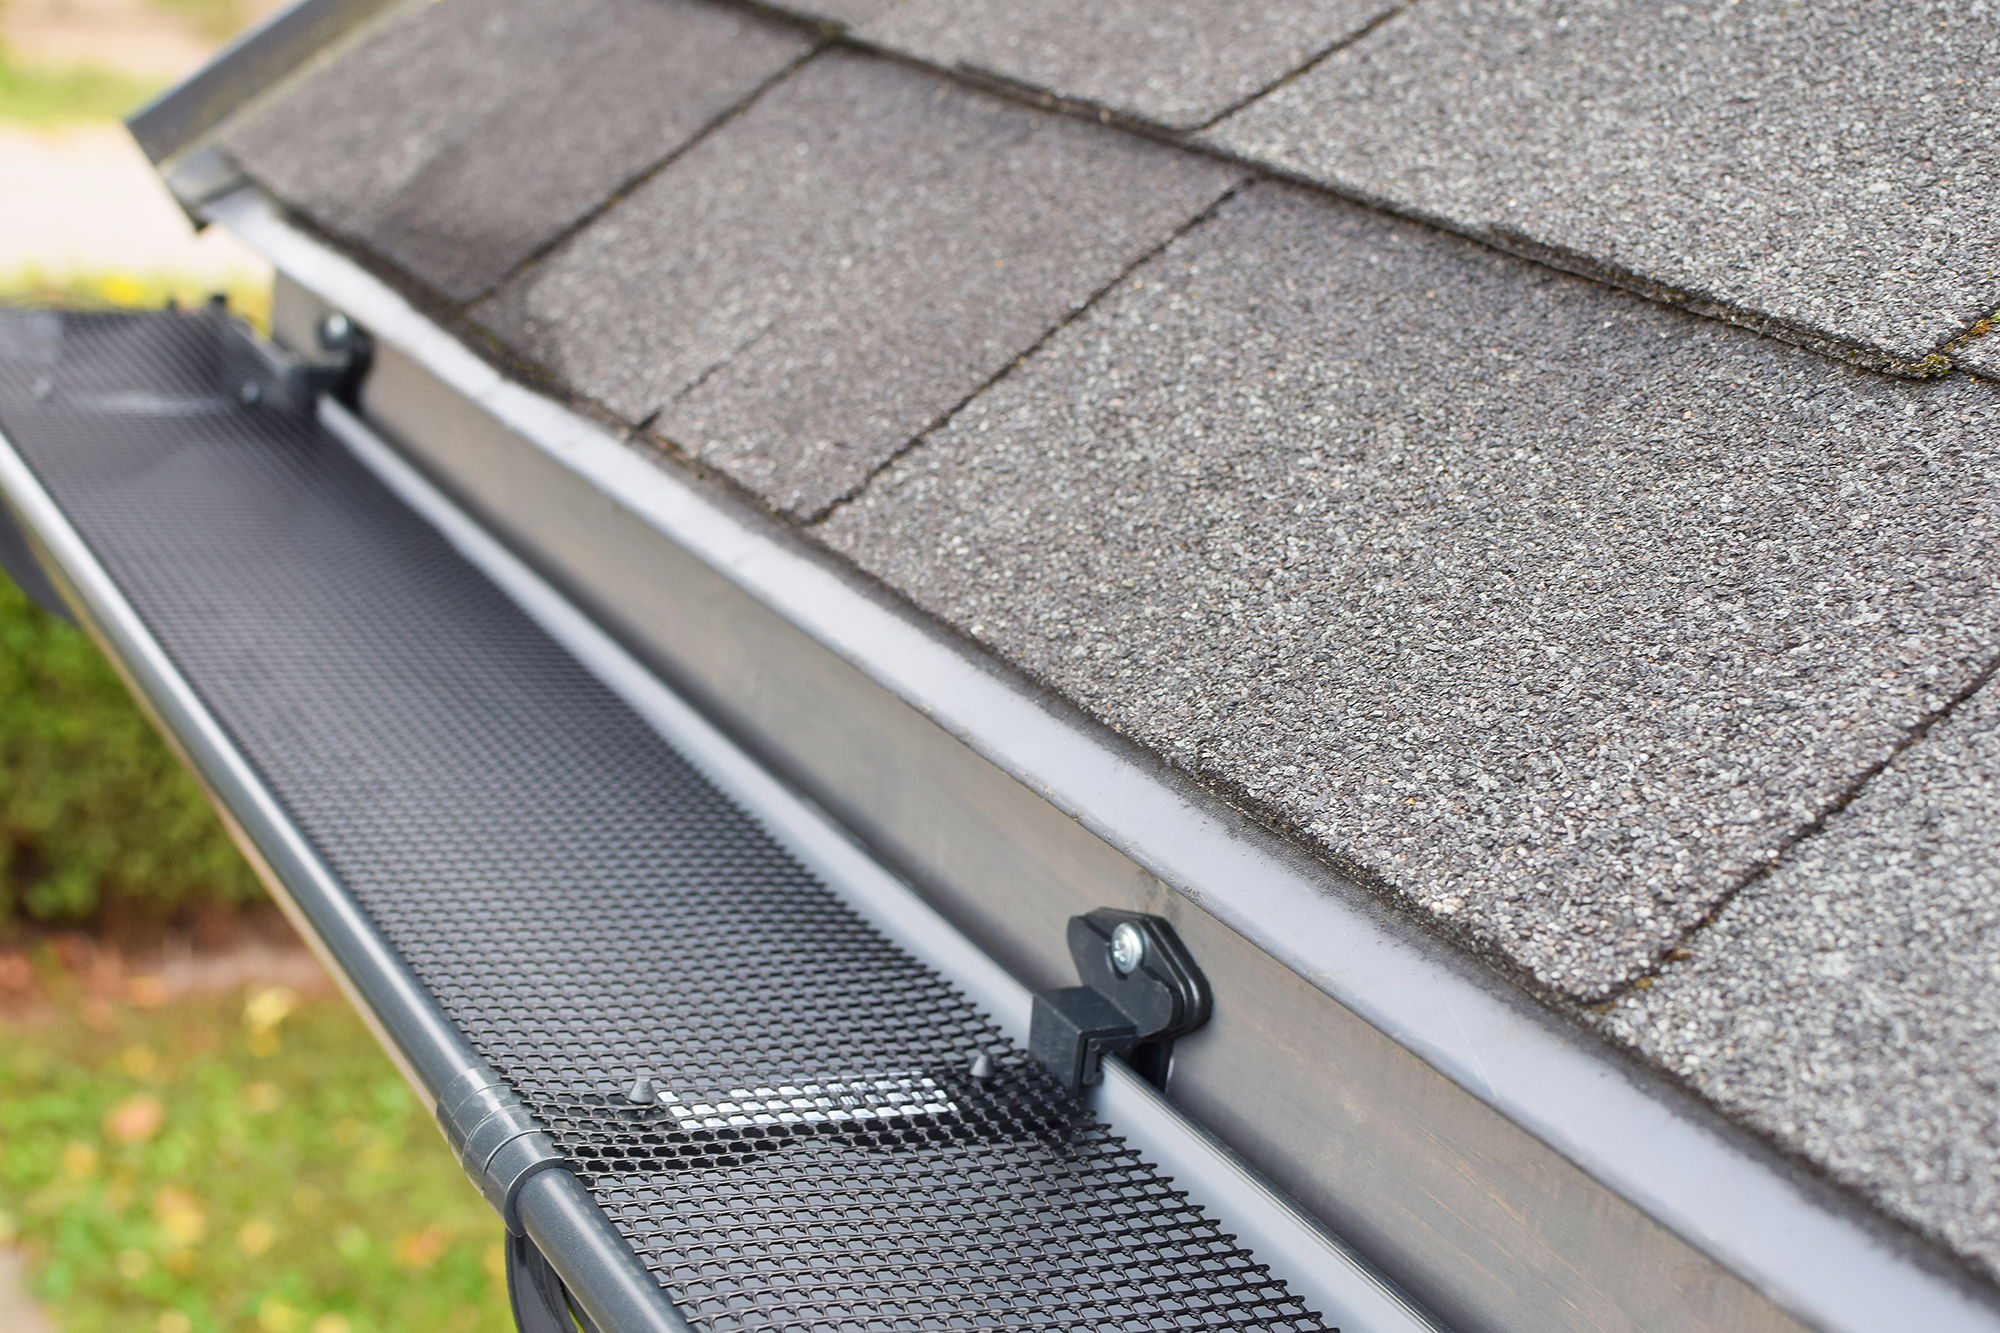 Why install gutter guards?